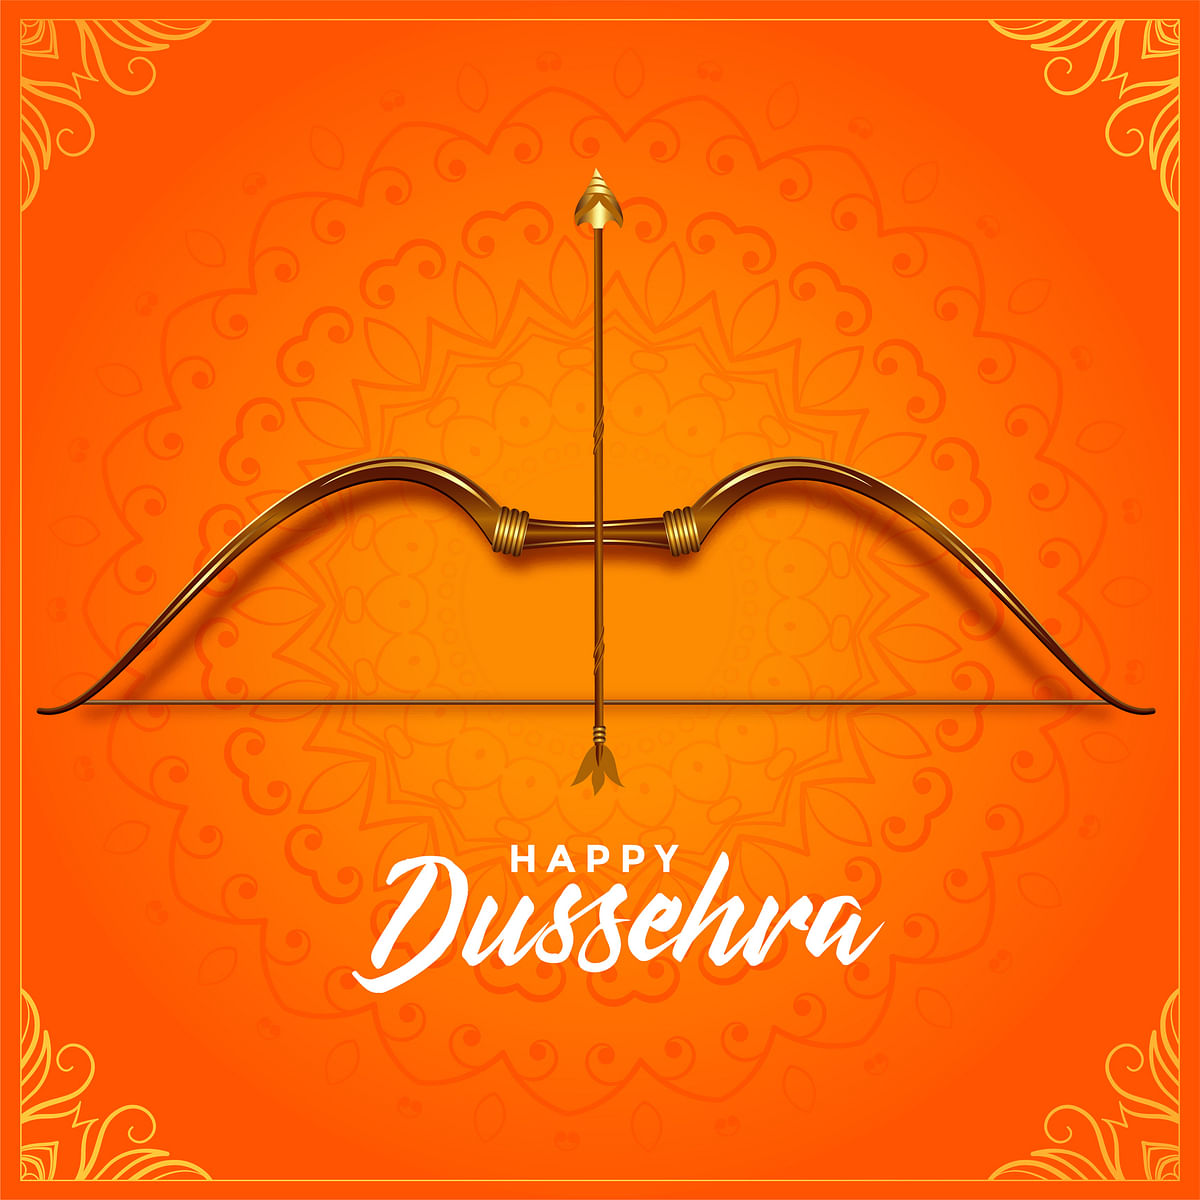 Dussehra 2019 Wishes, Quotes, Images and Greeting For Whatsapp message.